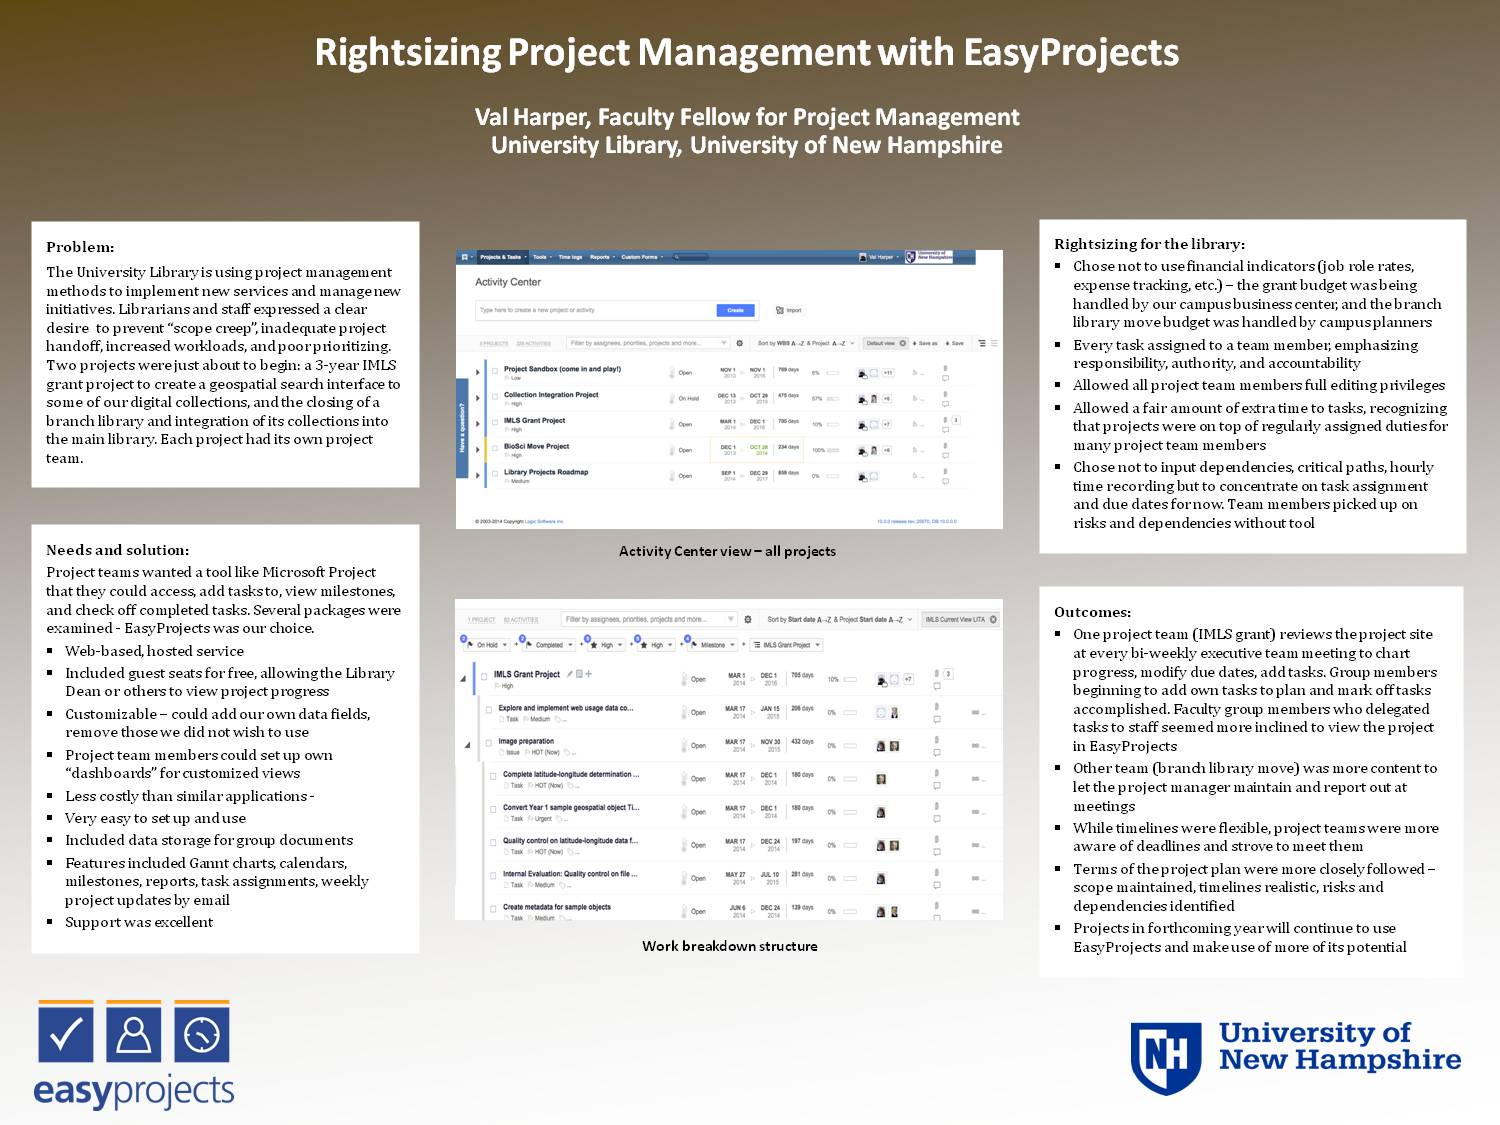 Rightsizing Projects With Easyprojects by vlh